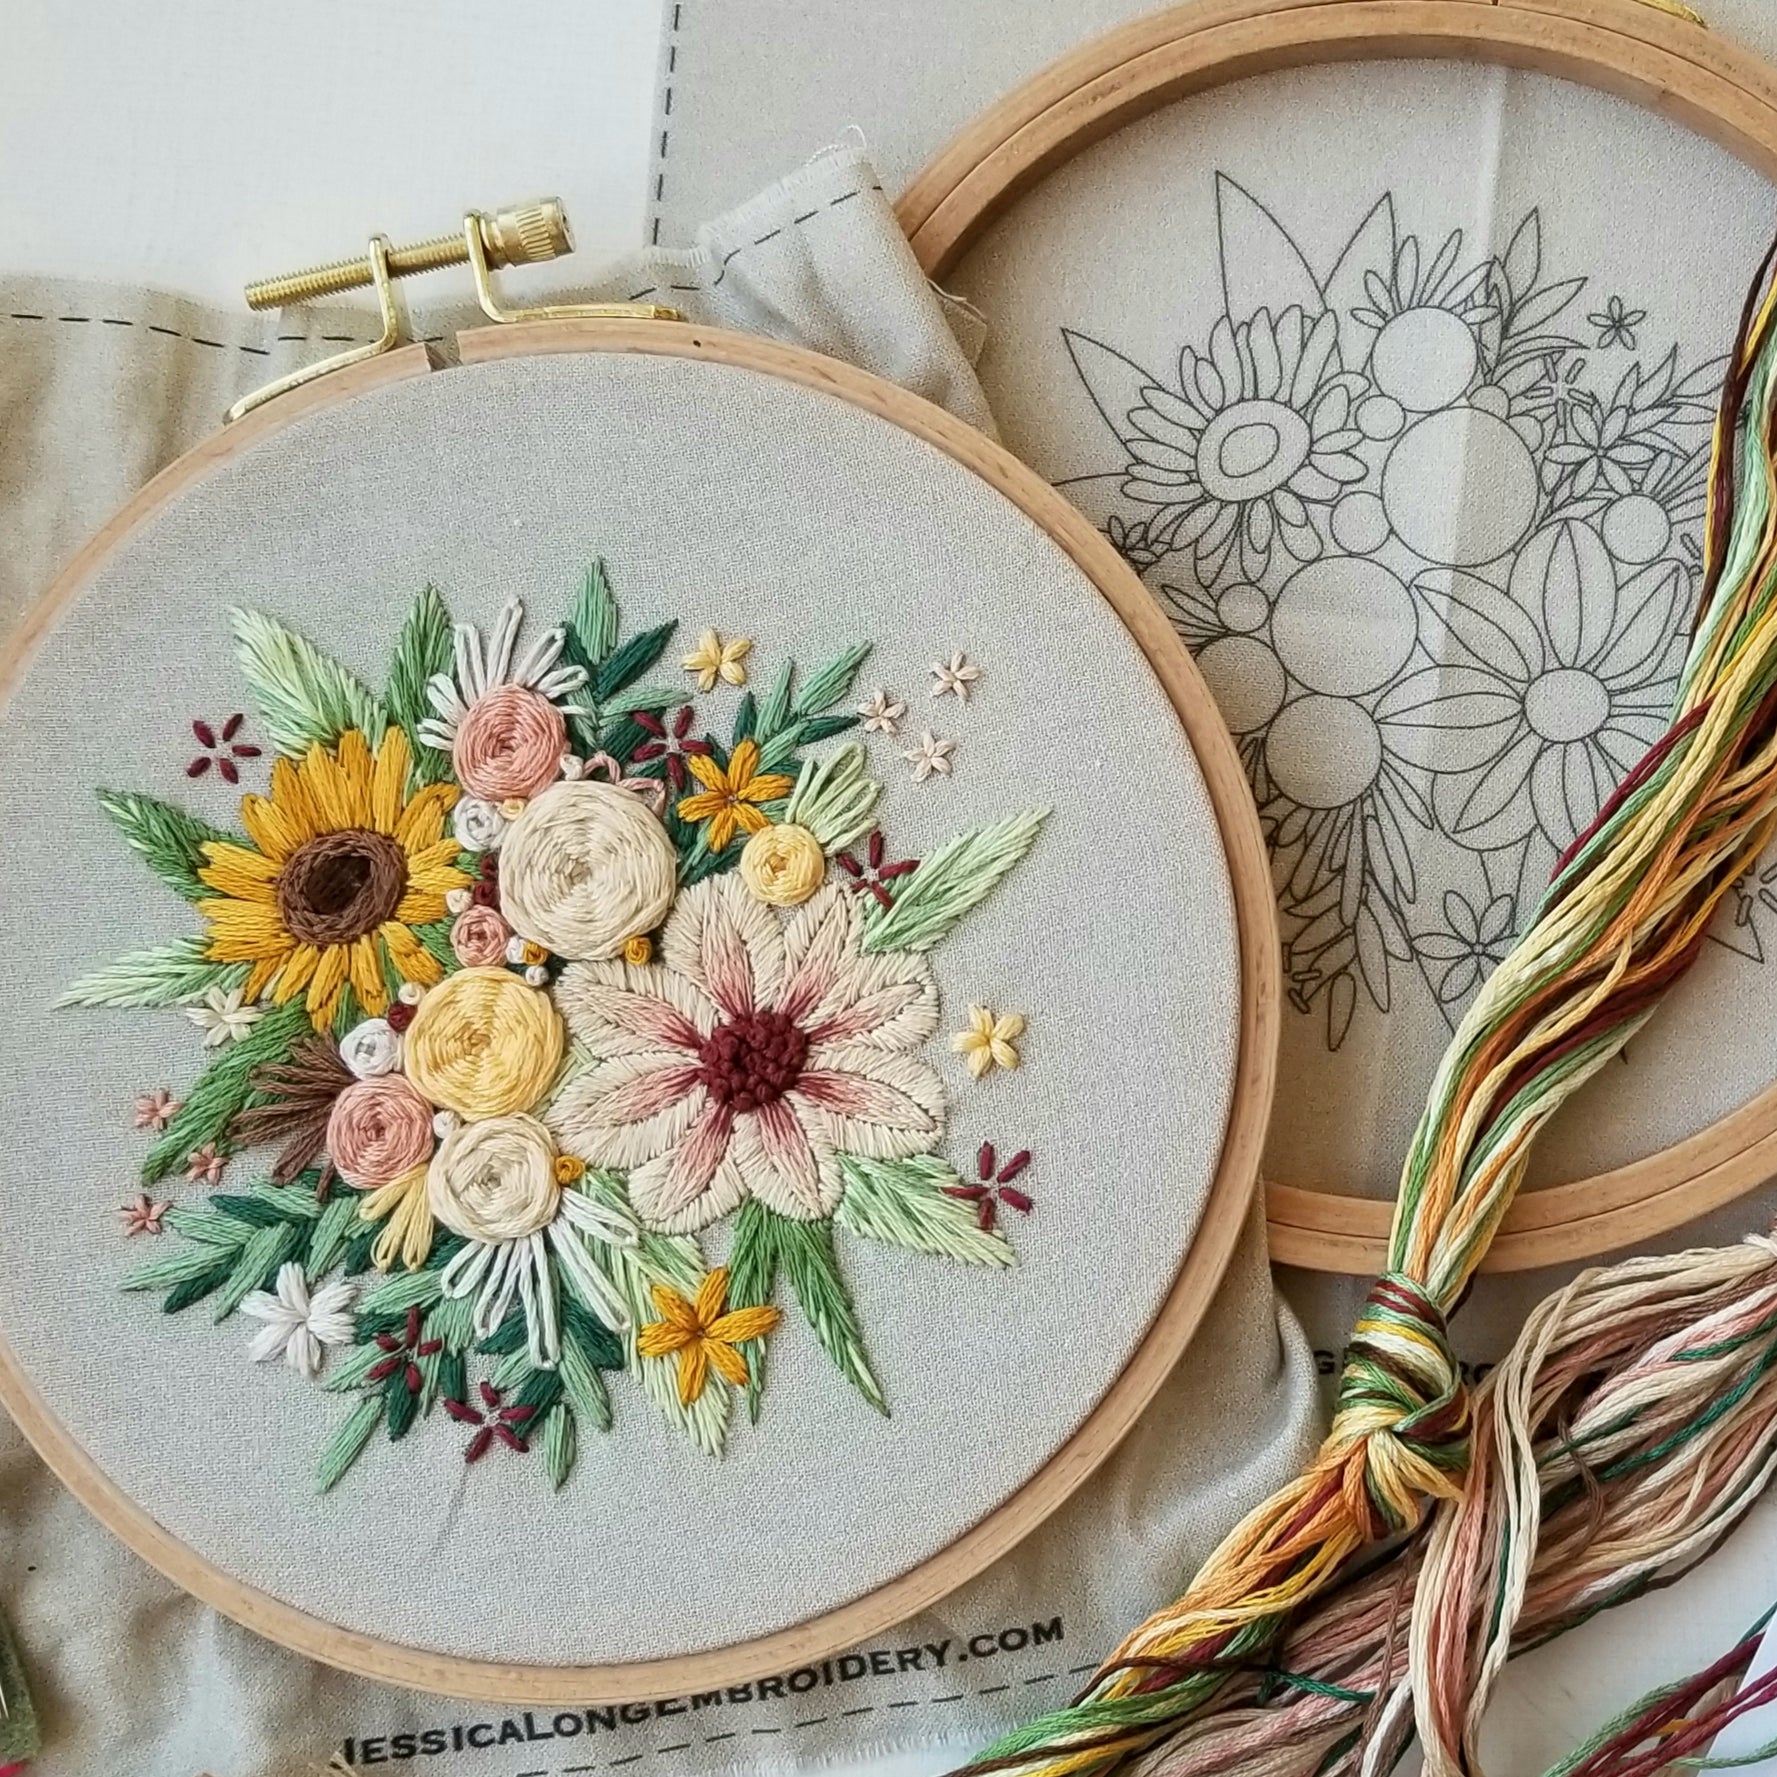 Embroidery Kit Starter, Floral Embroidery Kit, Needle Thread Tools